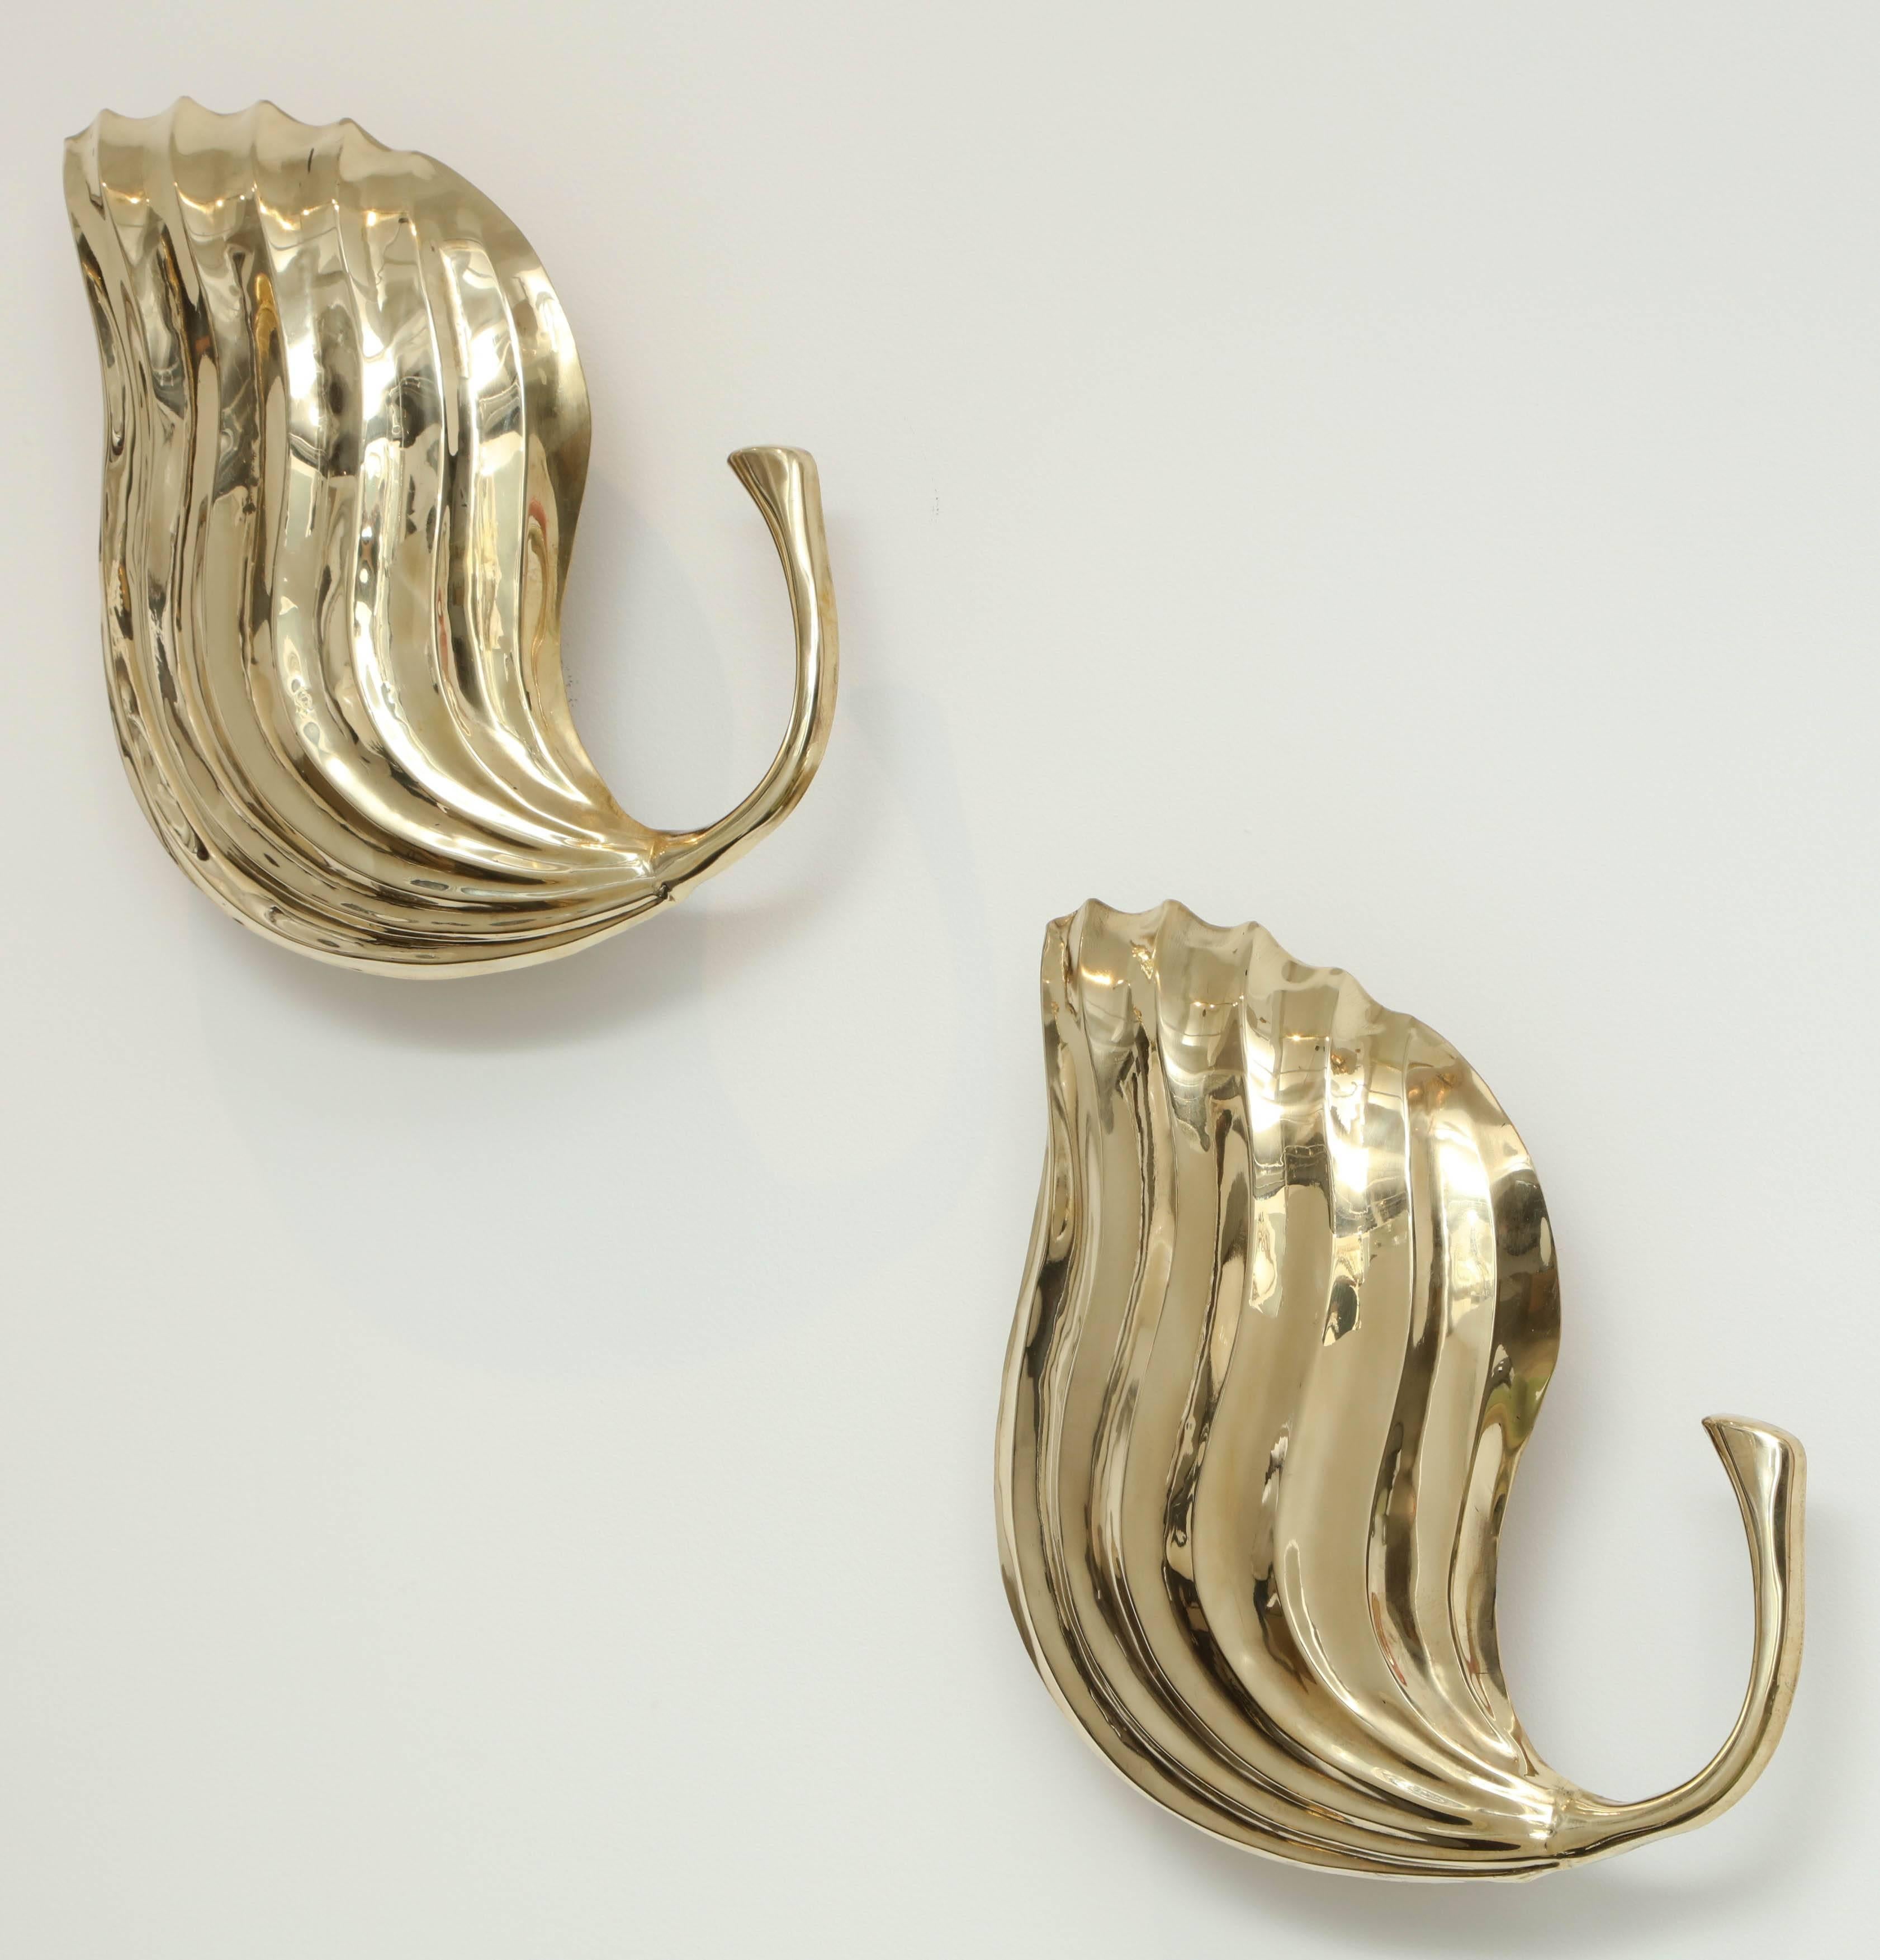 Italian hand-forged brass leaf sconces by Tomasso Barbi, 1970s. Newly repolished and rewired for US usage.